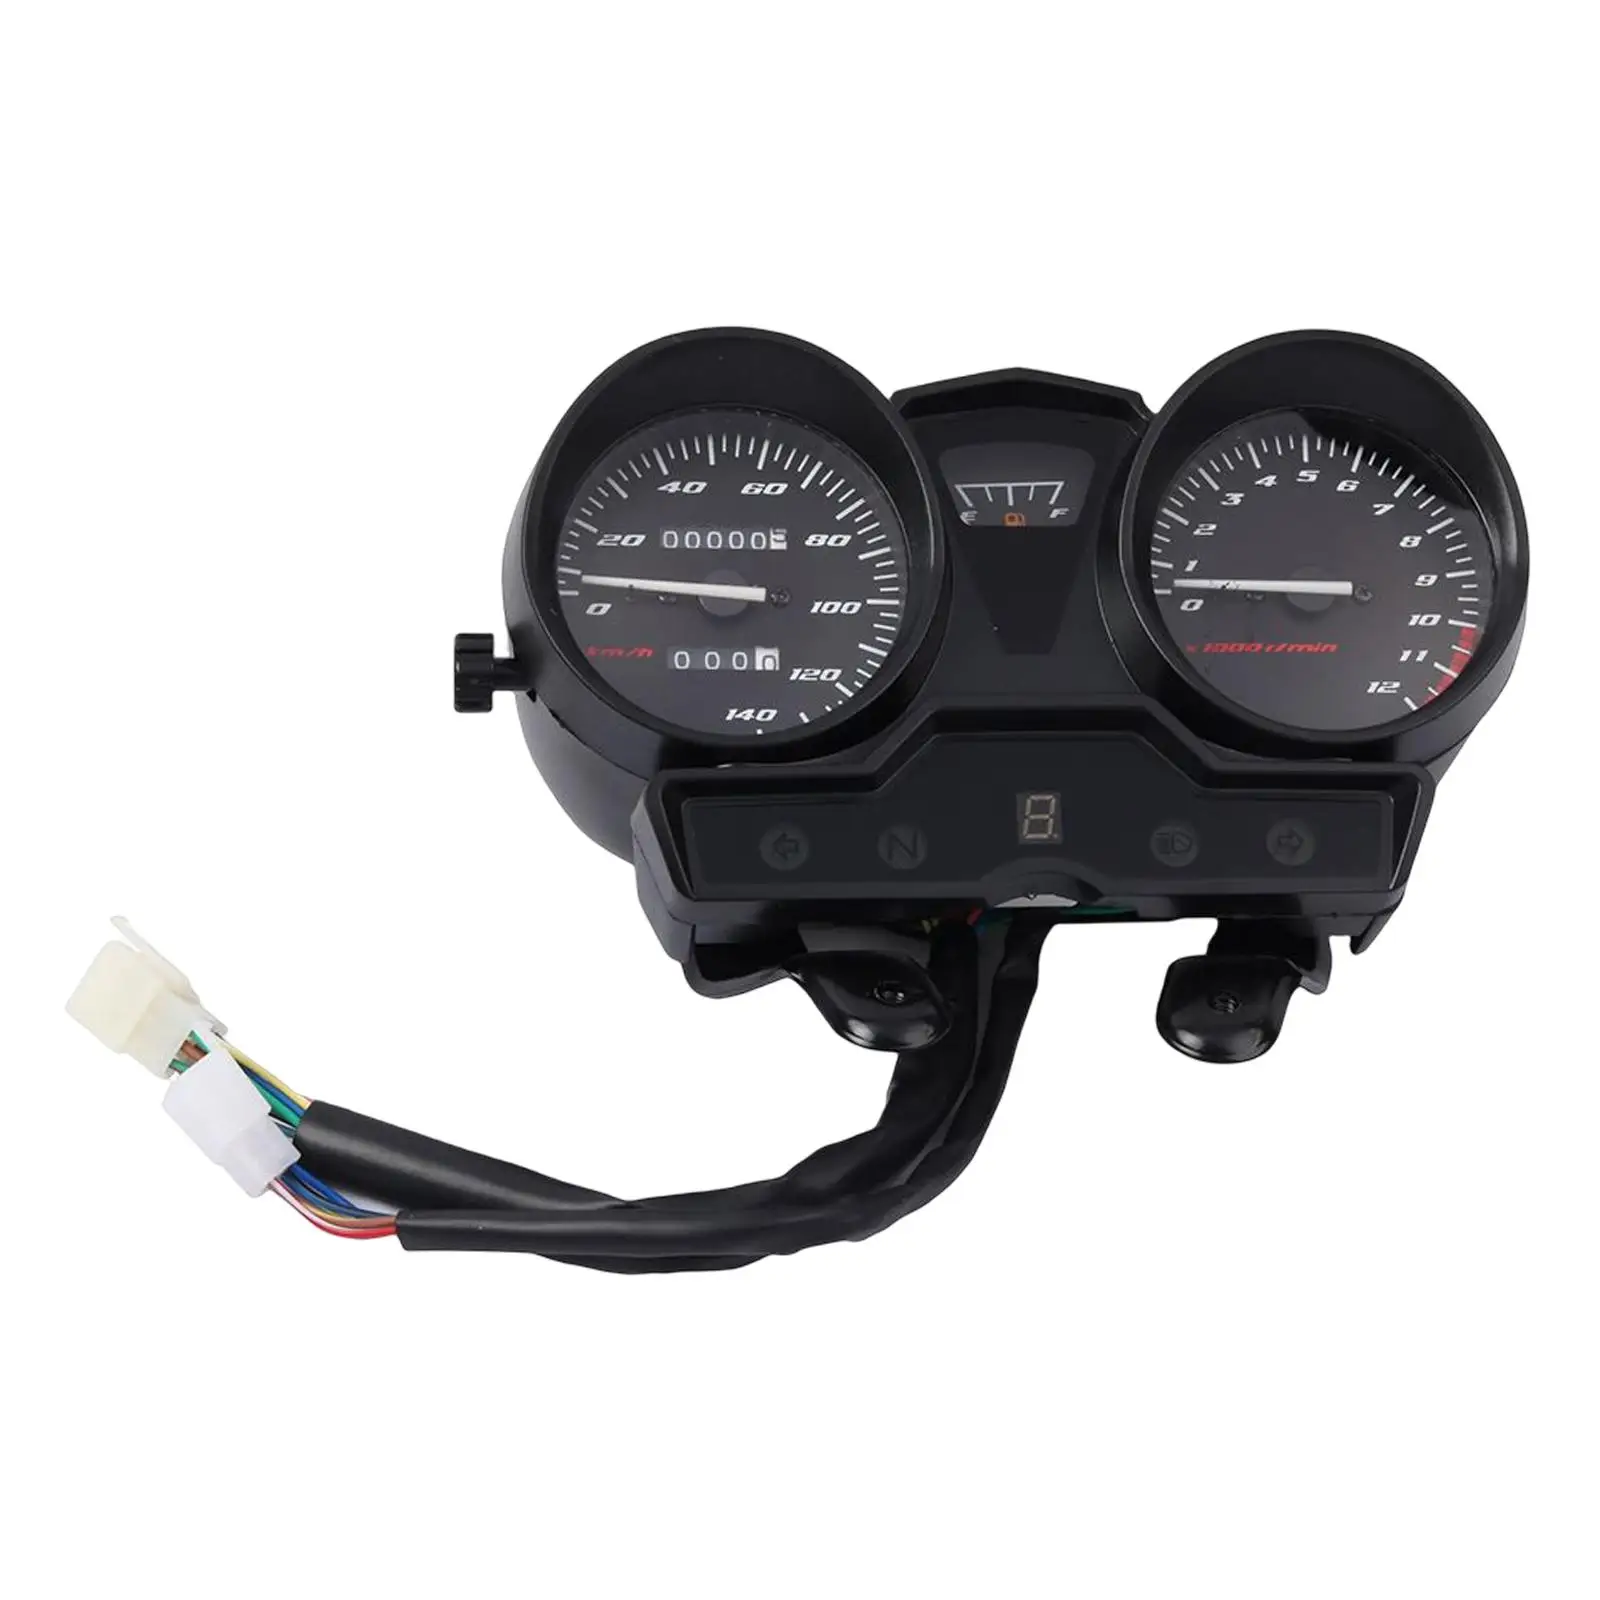 LED Digital Dashboard Motorcycle RPM Meter with Gear Display Car Accessories Premium